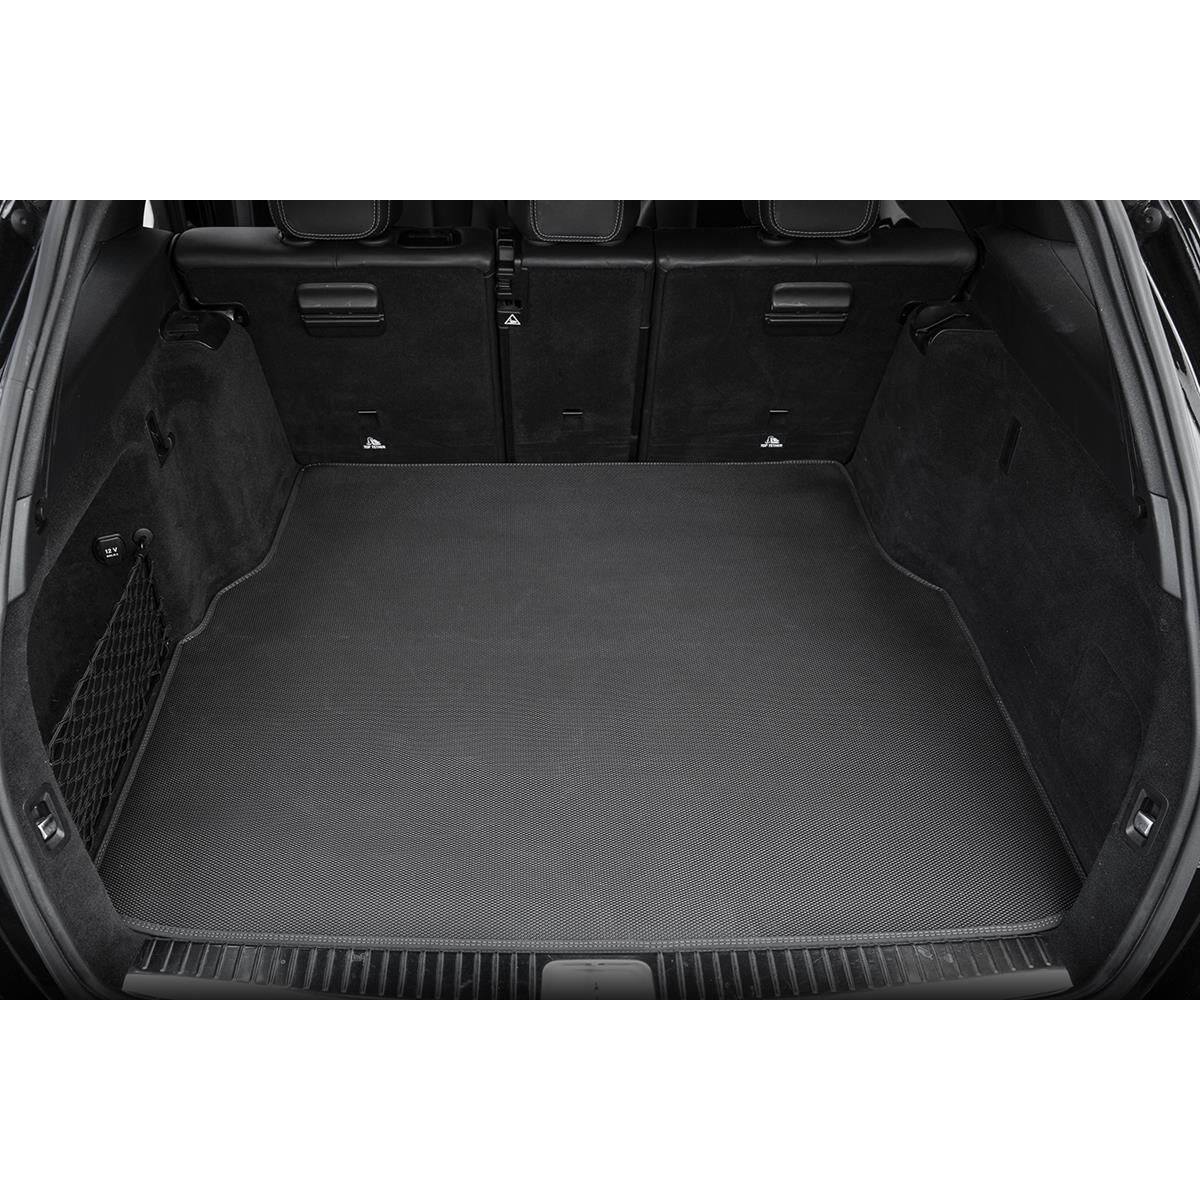 EXECUTIVE RUBBER BOOT LINER FOR BMW 5 SERIES (G30 SEDAN) 2017 ONWARDS, , scaau_hi-res